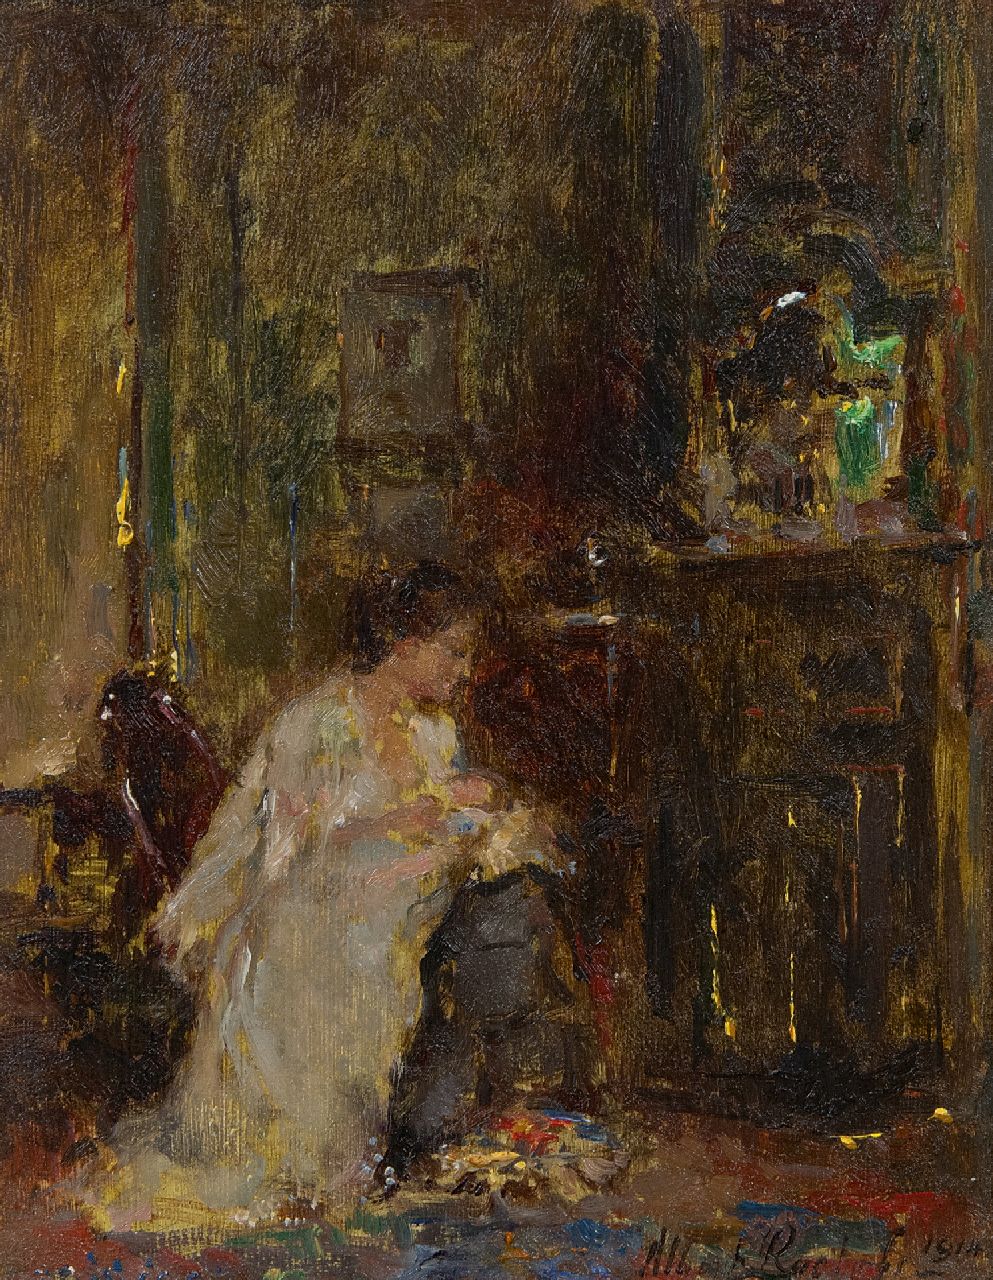 Roelofs O.W.A.  | Otto Willem Albertus 'Albert' Roelofs | Paintings offered for sale | Woman in an interior, oil on panel 17.8 x 13.8 cm, signed l.r. and dated 1914